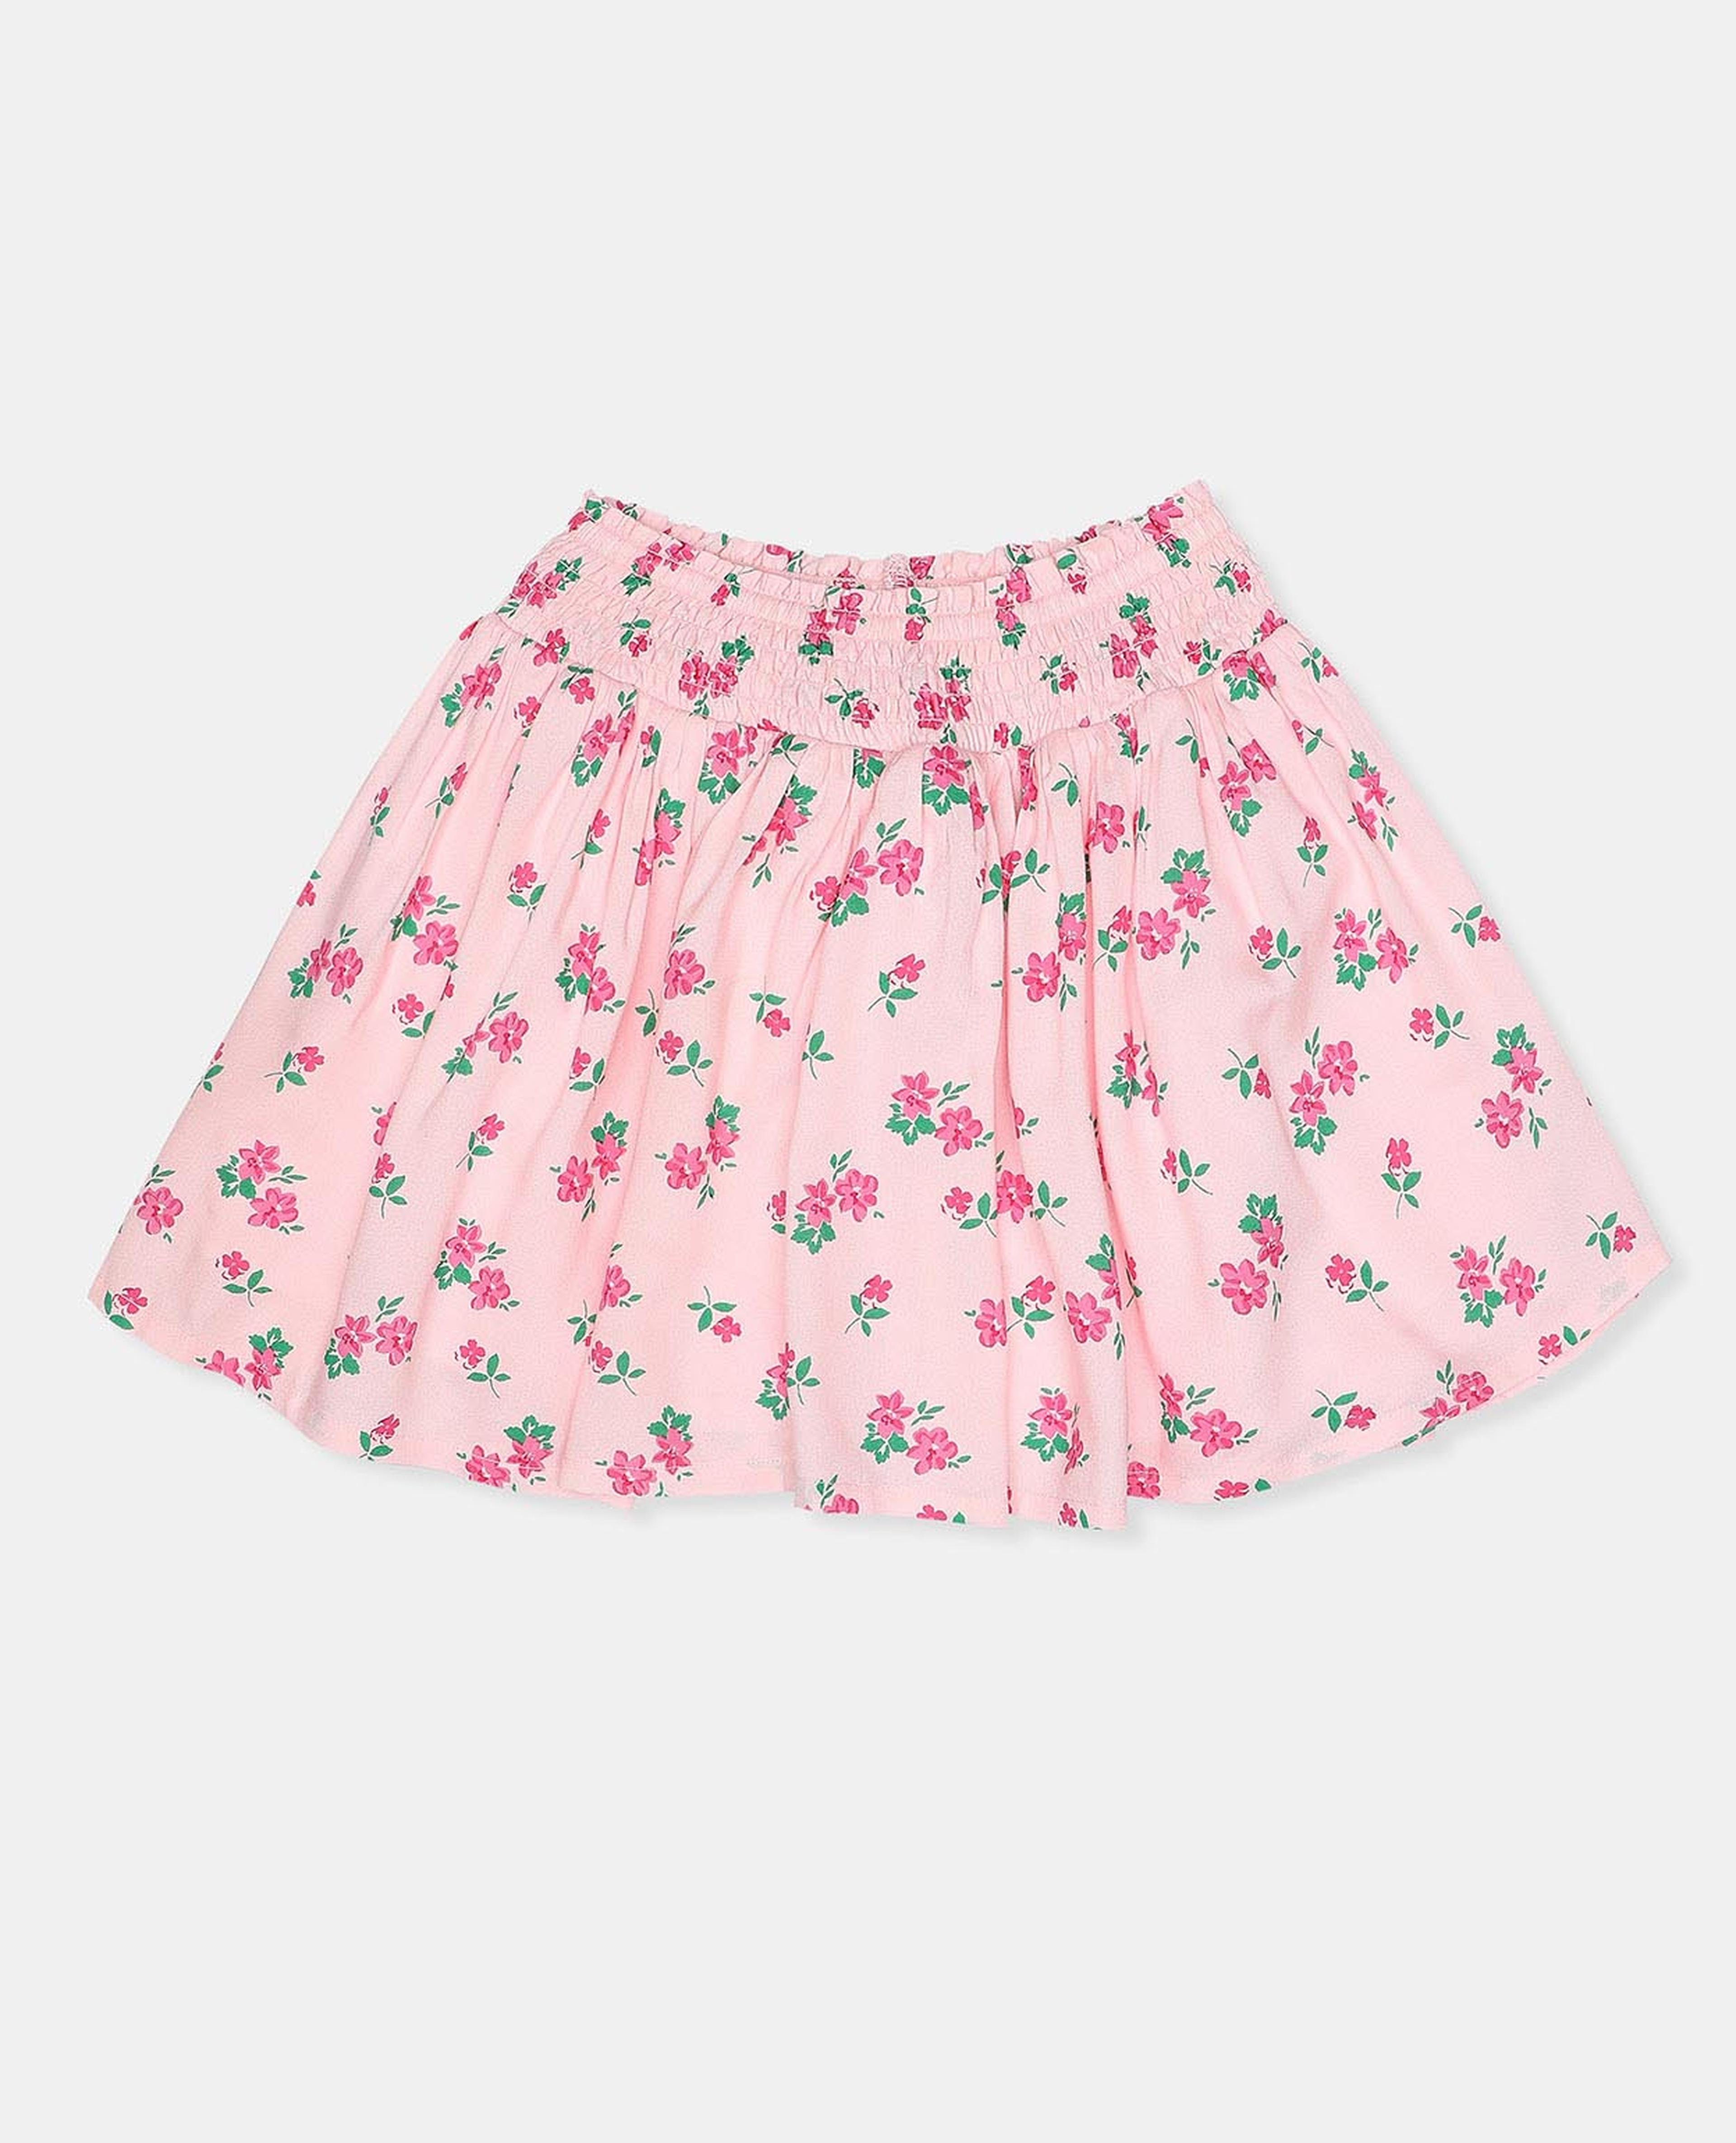 Floral Printed Skirt with Slip-On Closure